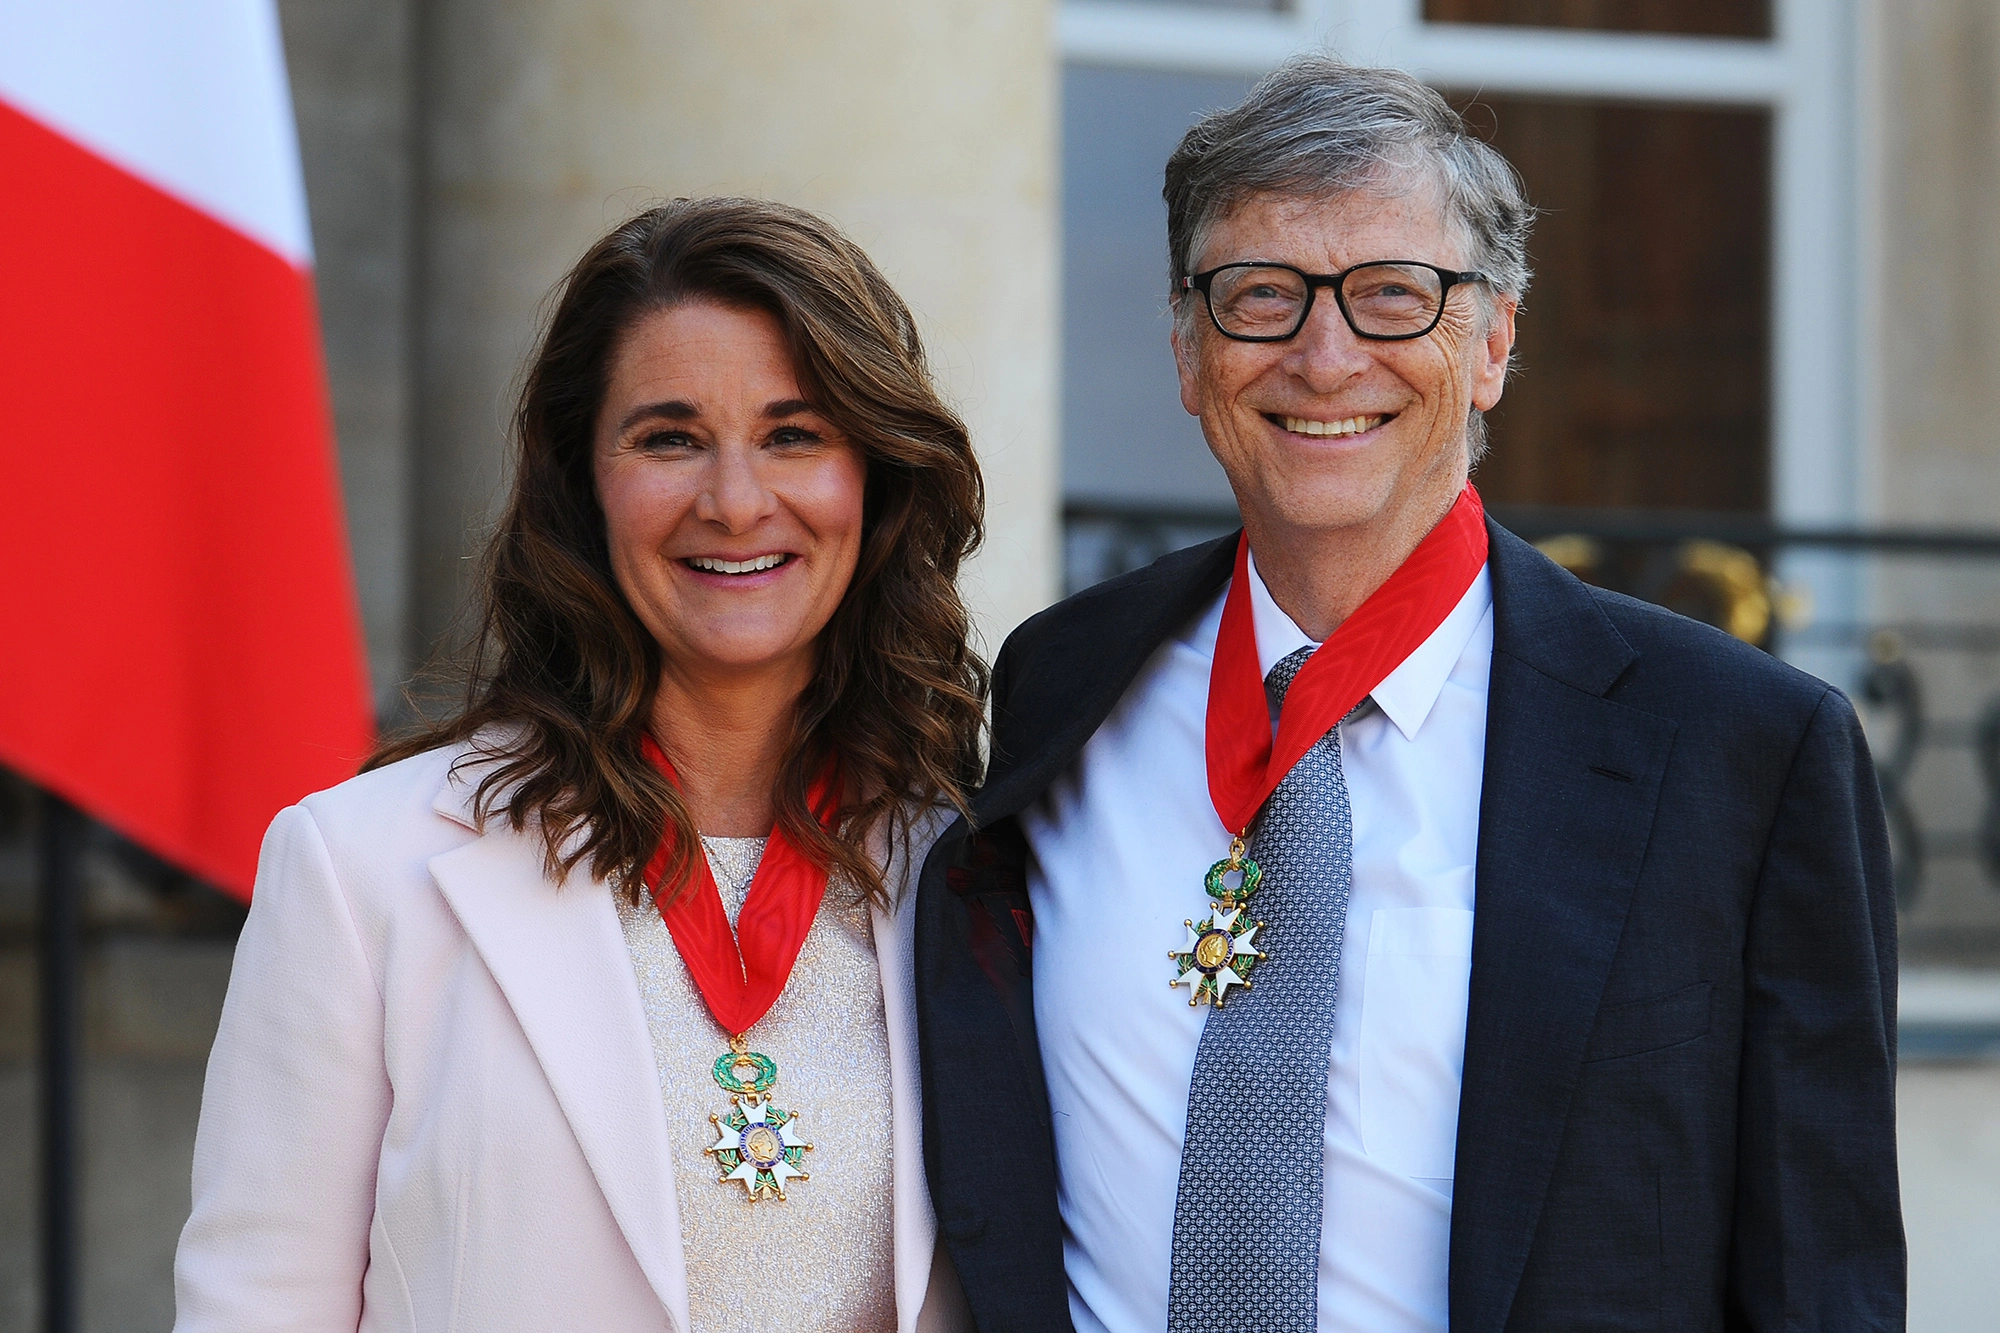 Melinda Gates opened up about her divorce from Bill Gates